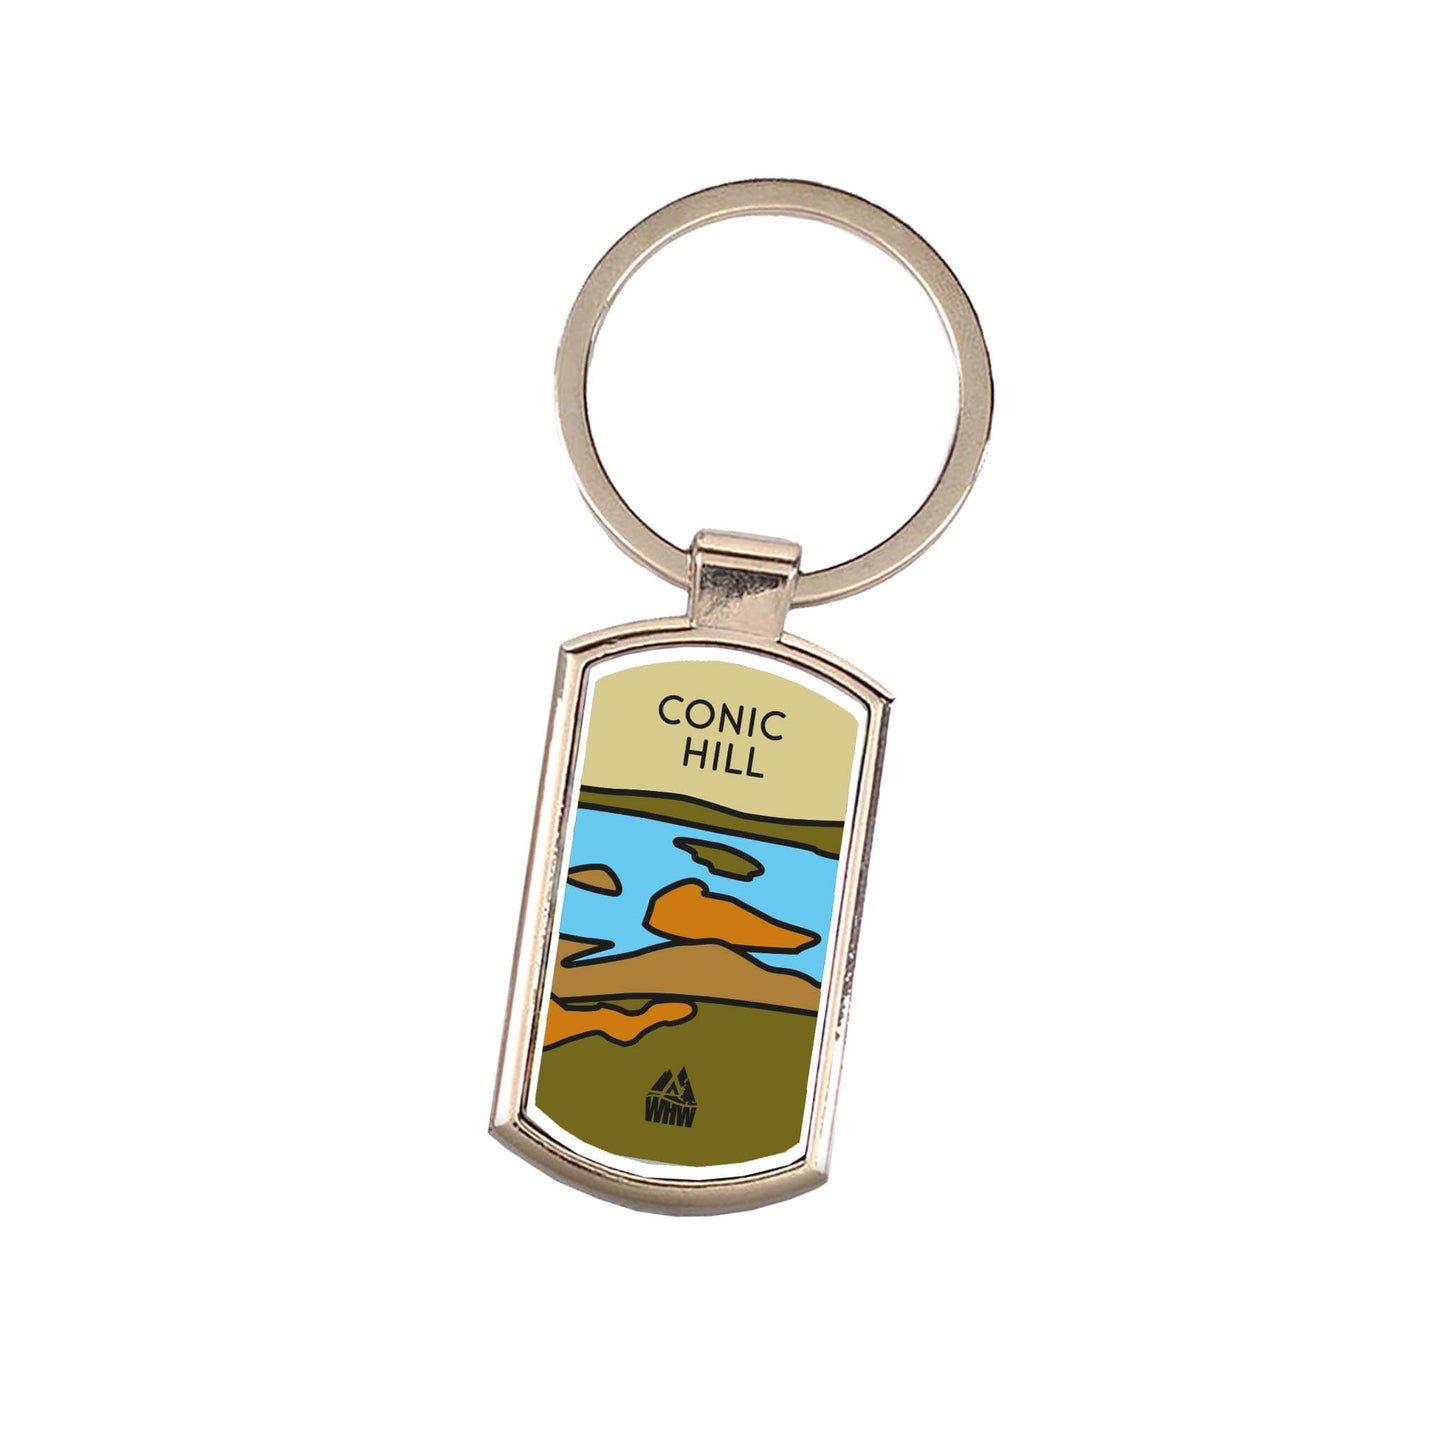 Conic Hill Keyring - West Highland Way